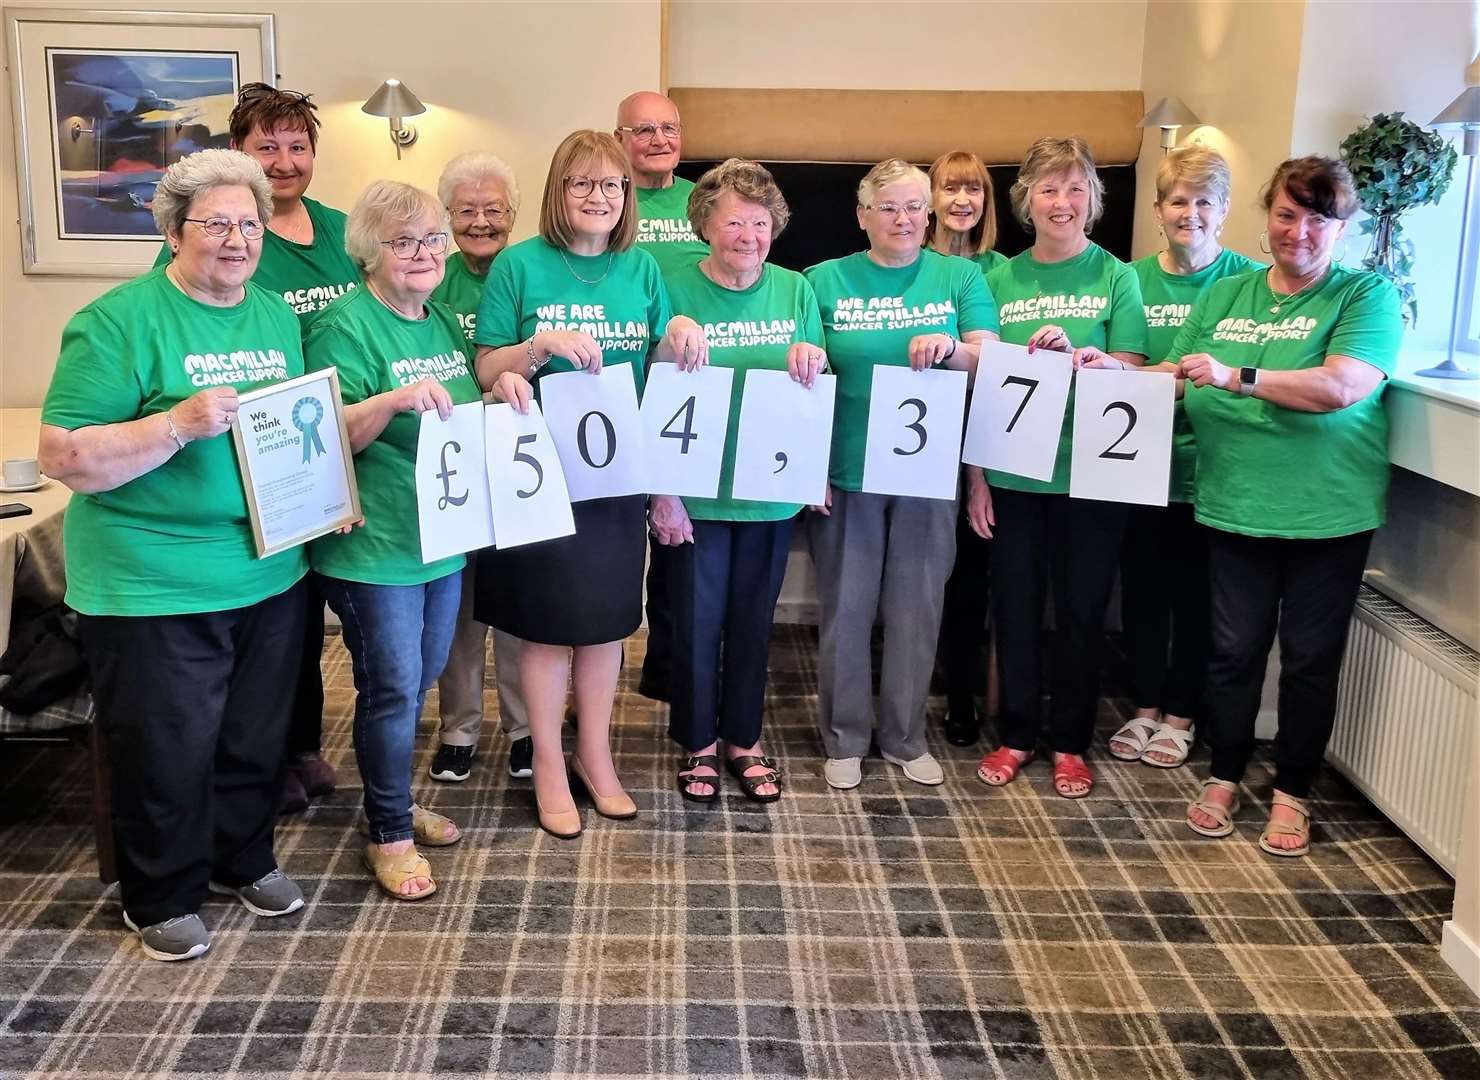 Members of the Macmillan Cancer Support Thurso Fundraising Group at the Pentland Hotel. The members hold up figures to represent the £504,372 raised over the years.